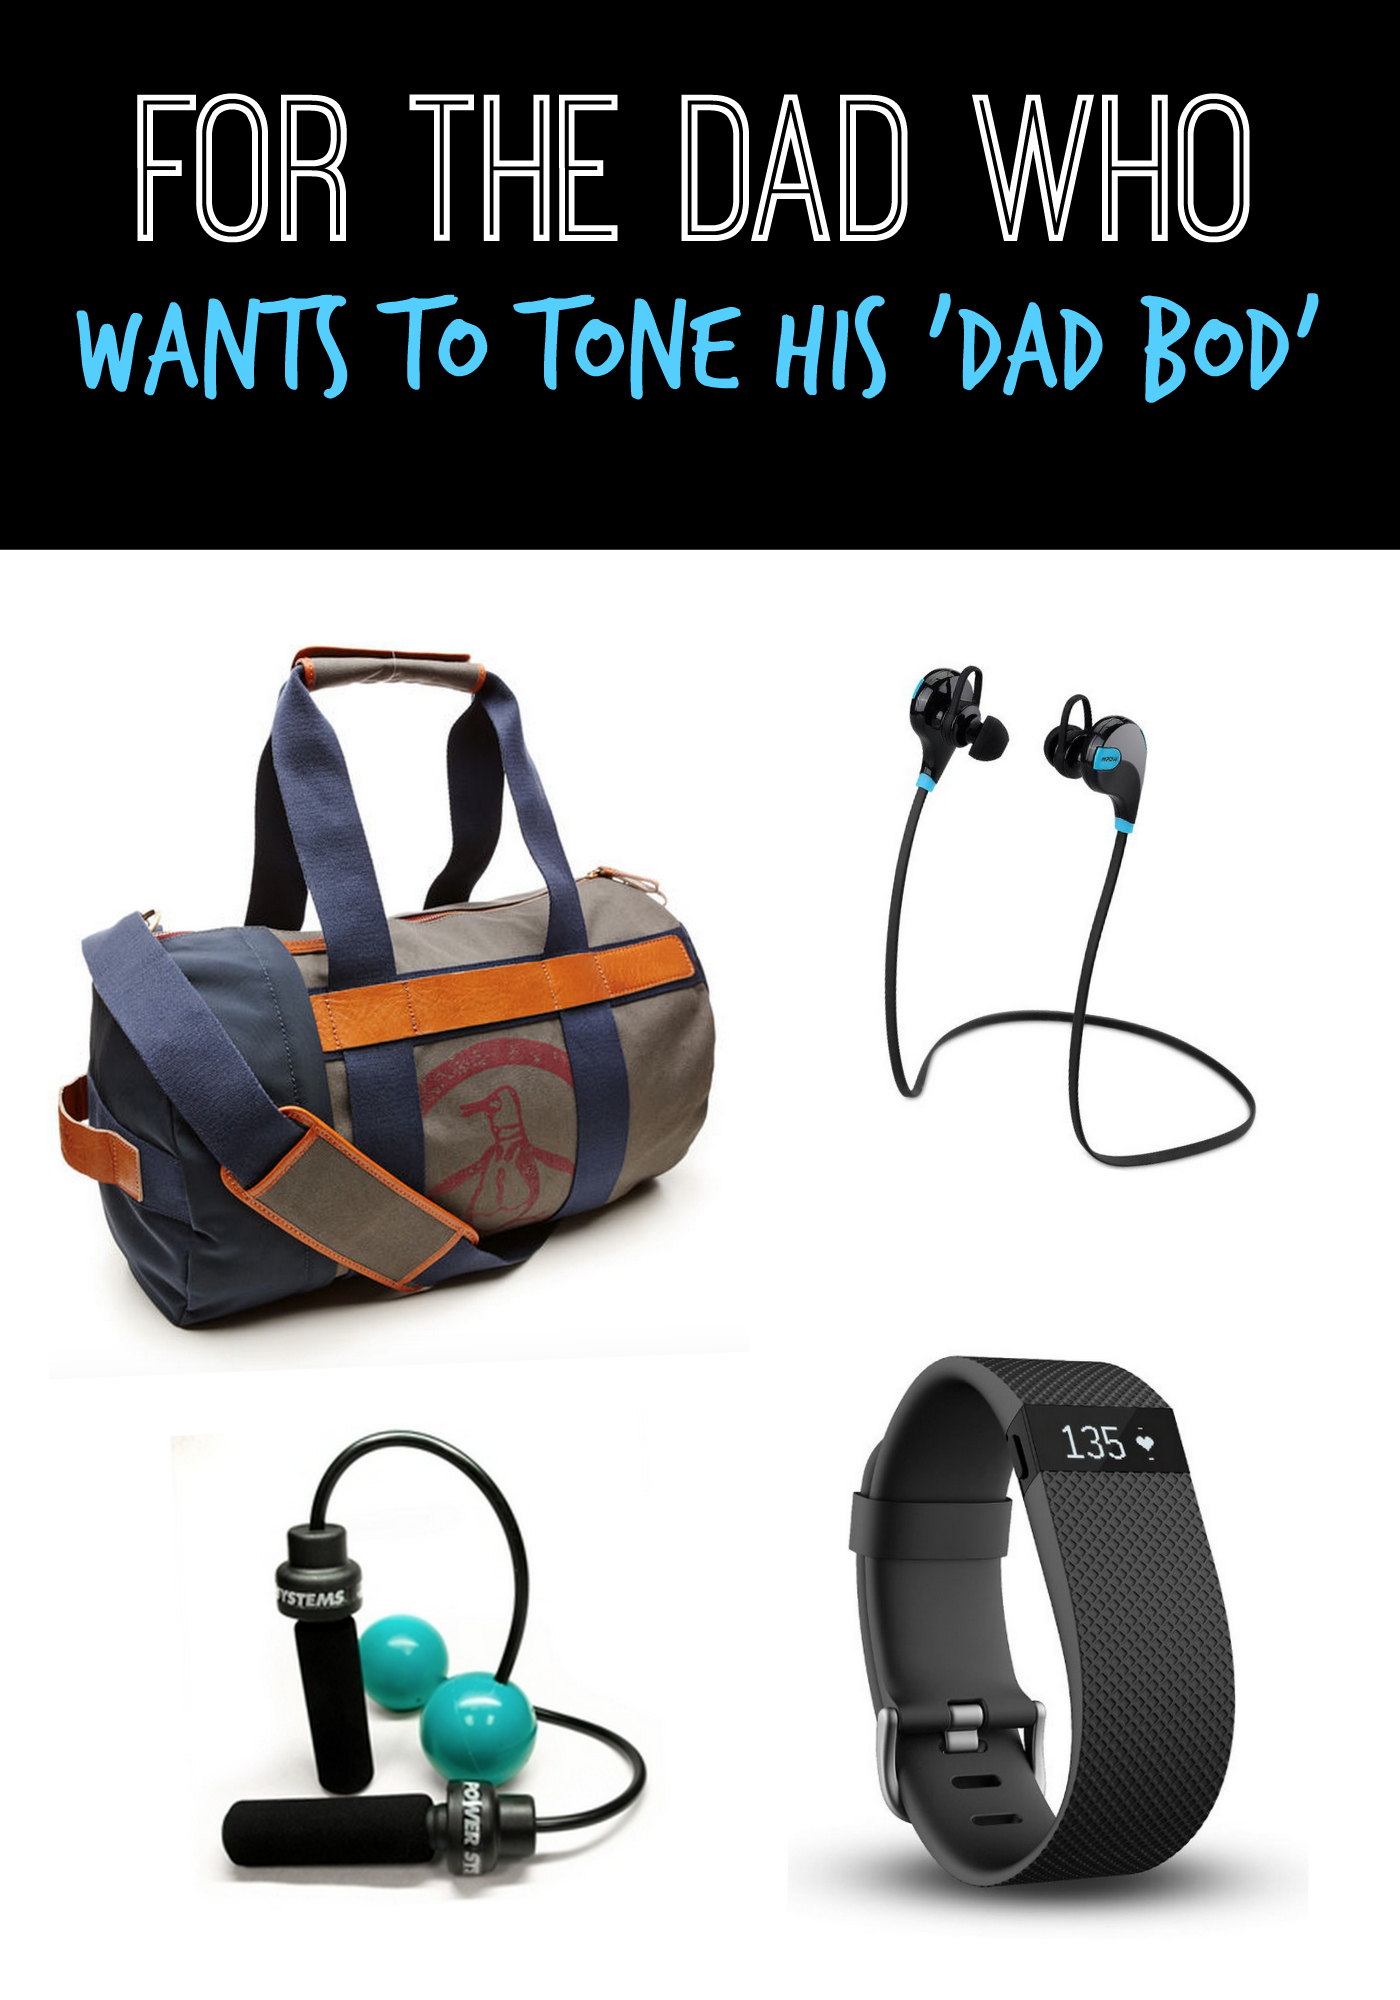 For The Dad Who Wants to Tone His Dad Bod